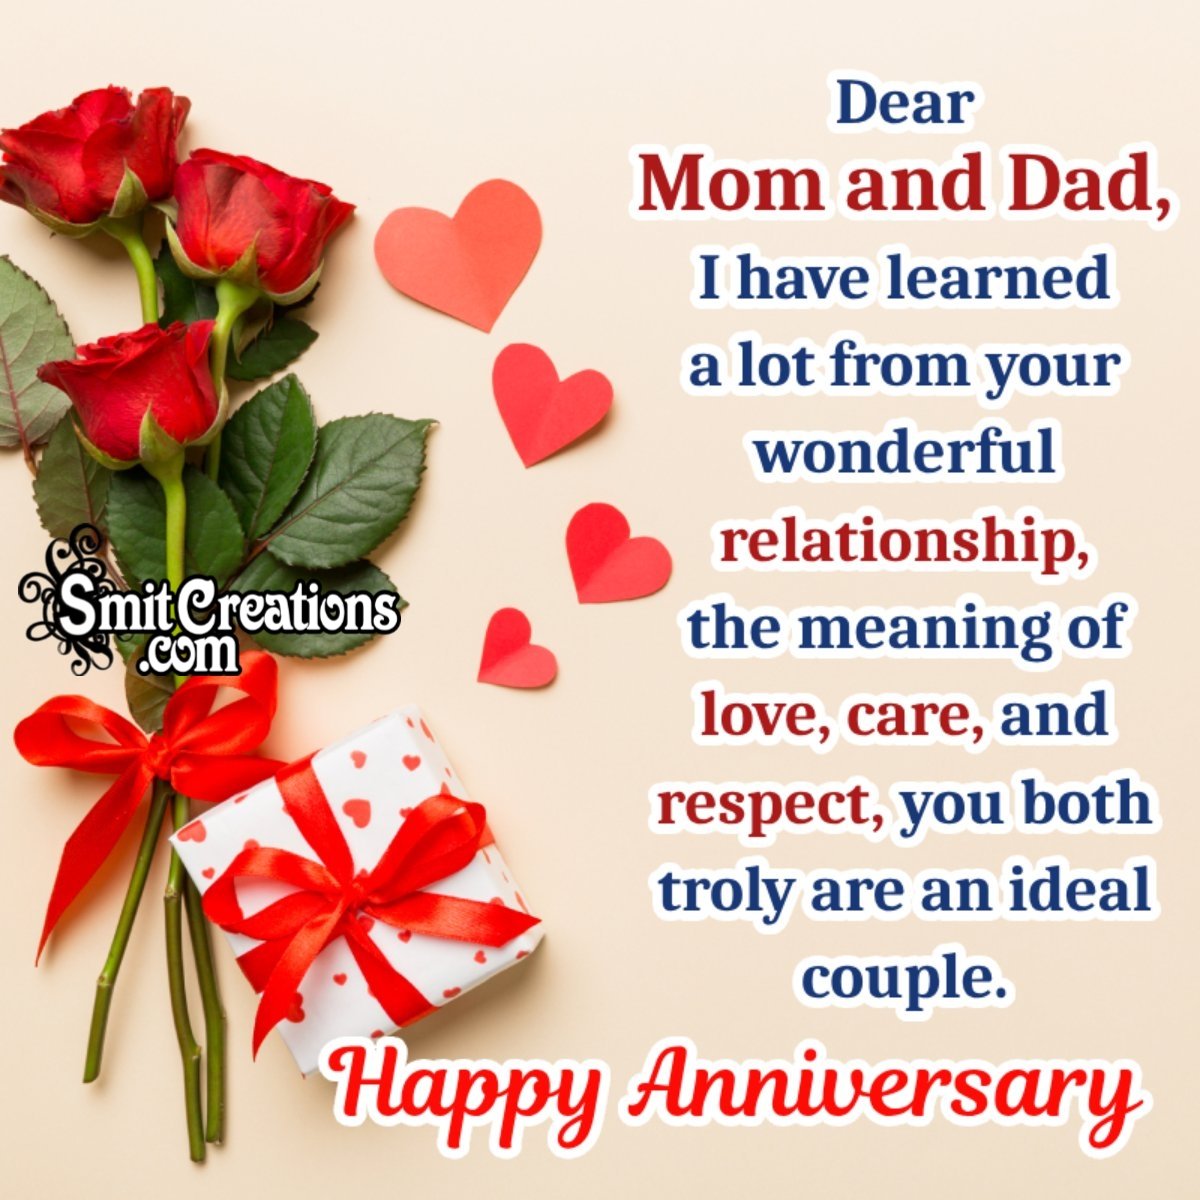 40 Anniversary Wishes For Parents - Smit Creations – Your Daily Dose of ...